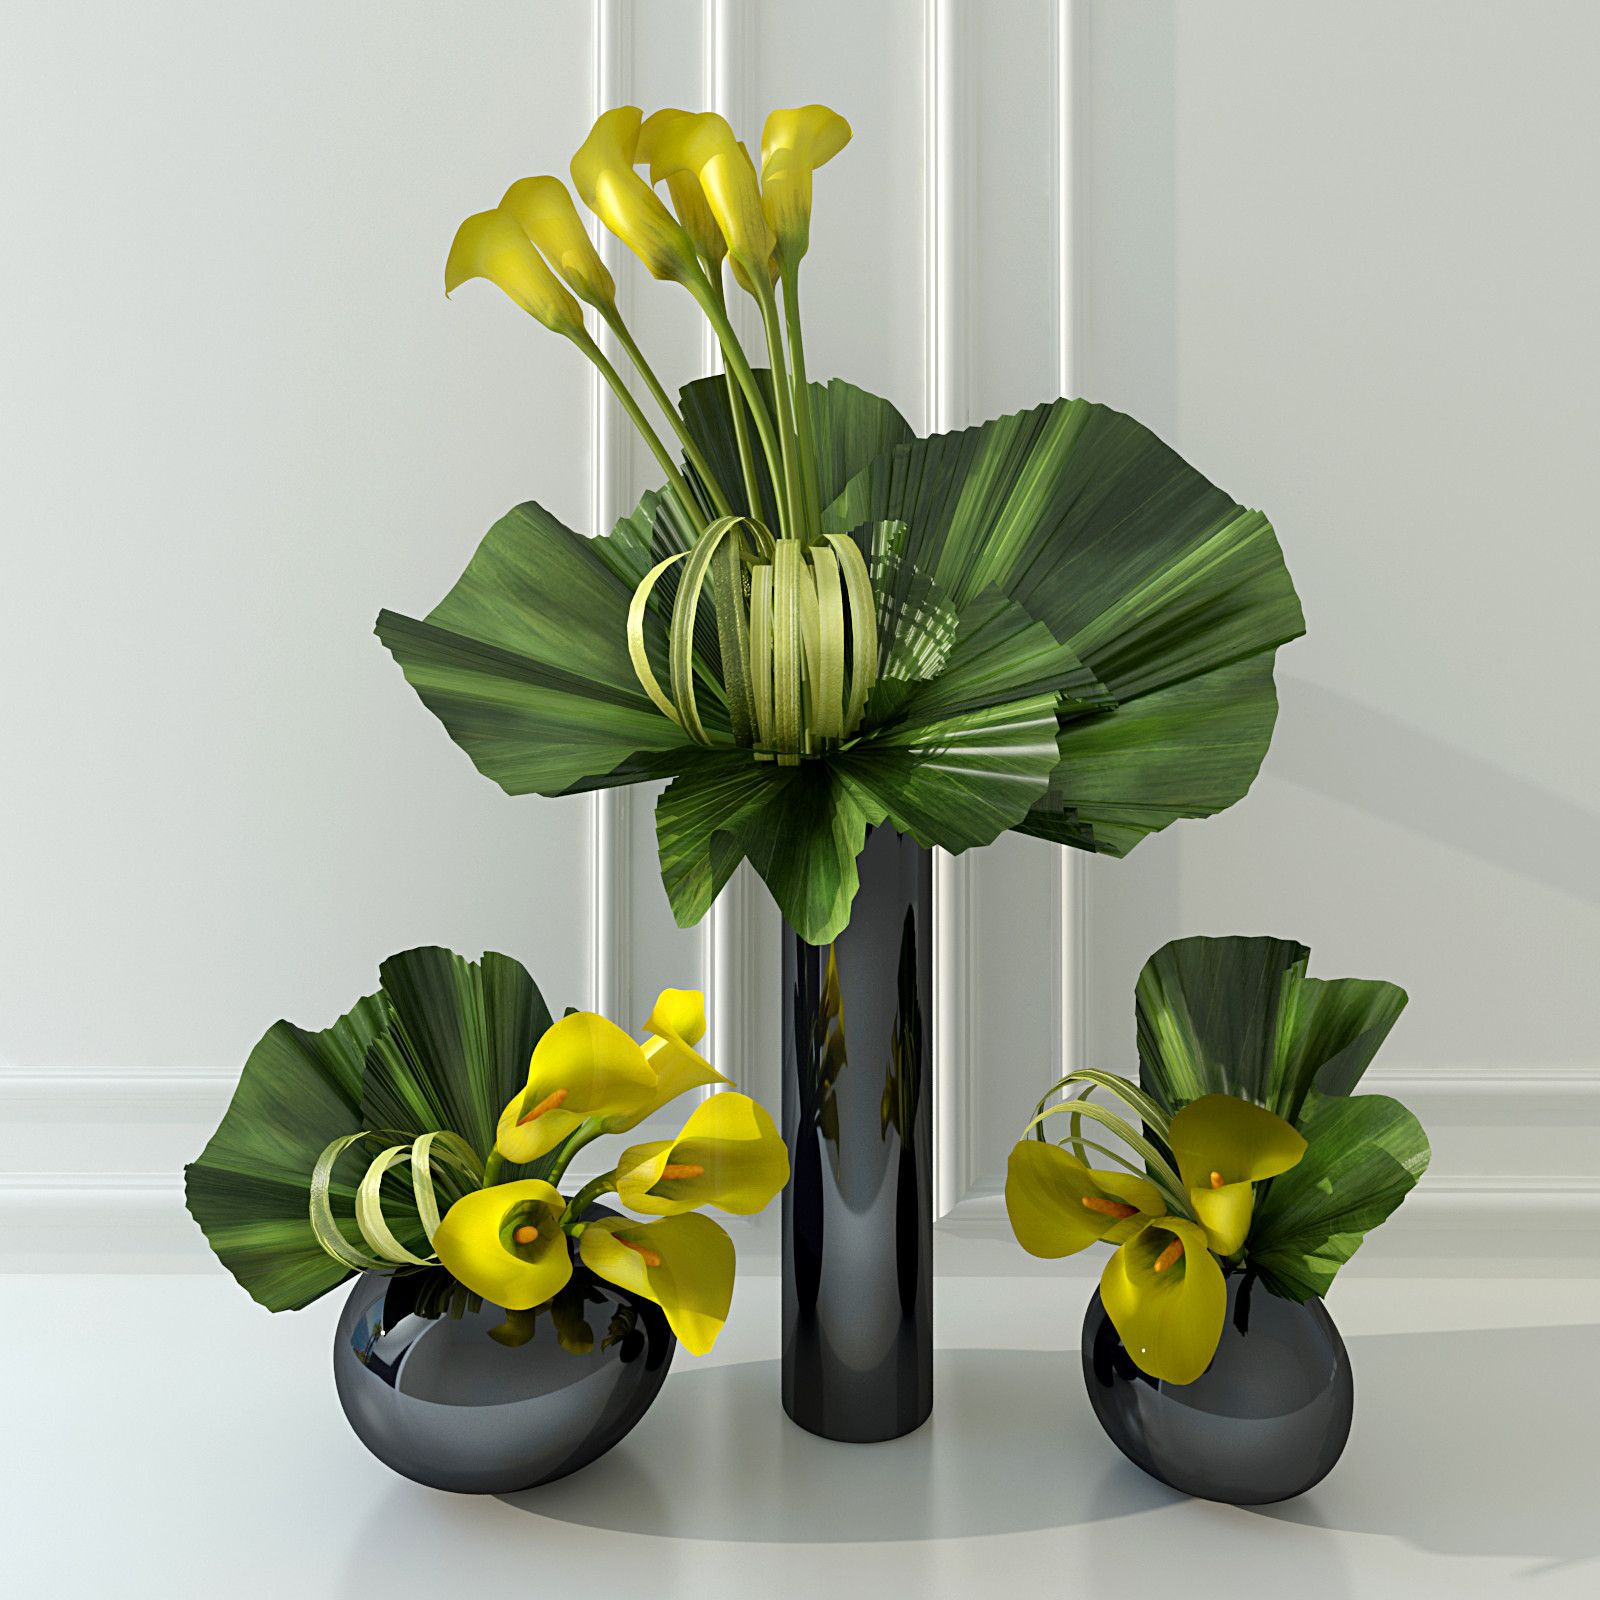 23 Elegant White Calla Lilies In Vase 2024 free download white calla lilies in vase of 3d calla lily 3d model 3d modeling pinterest calla lilies and 3d inside 3d calla lily 3d model